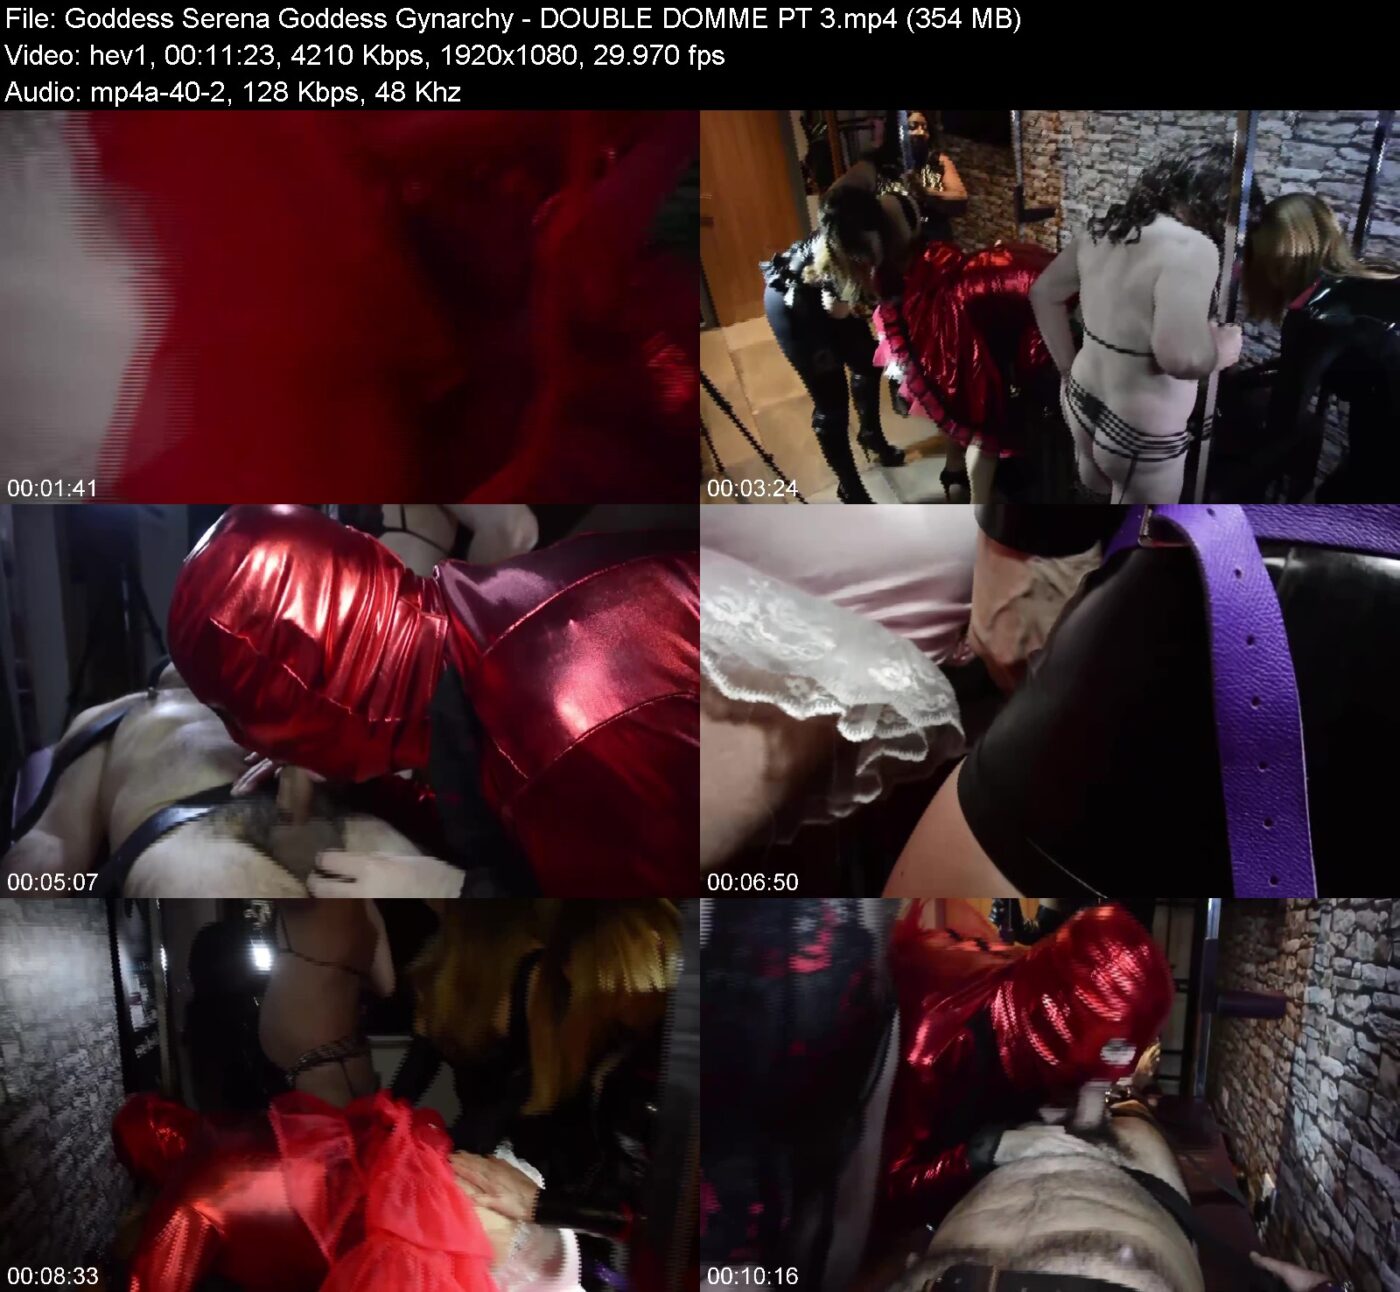 Goddess Serena Goddess Gynarchy in DOUBLE DOMME PT 3